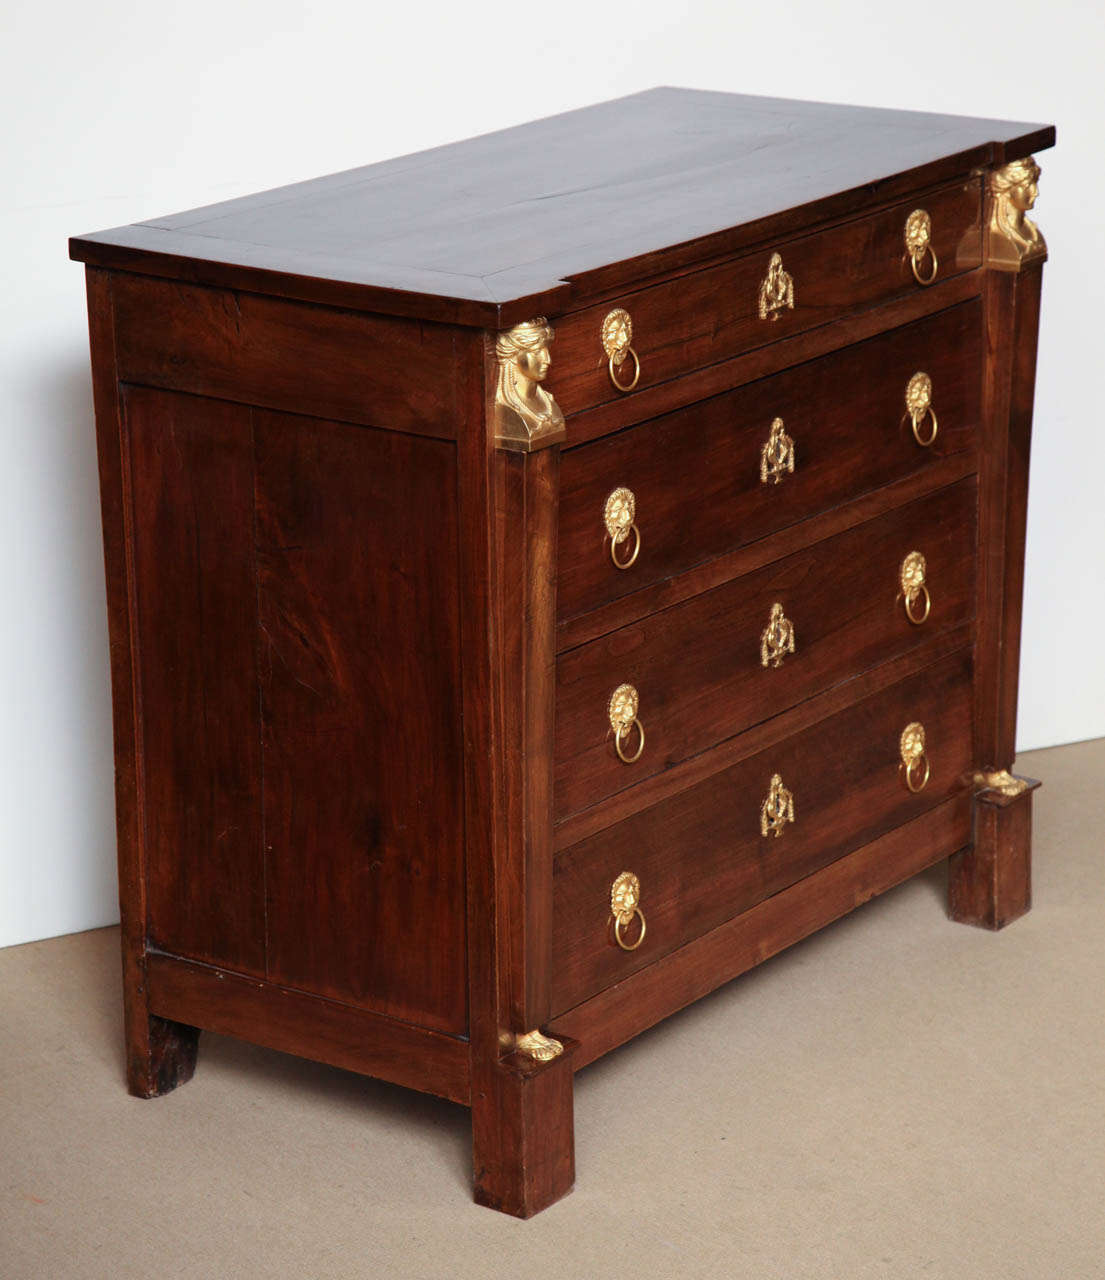 Early 19th Century Mahogany and Gilt Bronze Mounted Danish Empire Chest For Sale 5